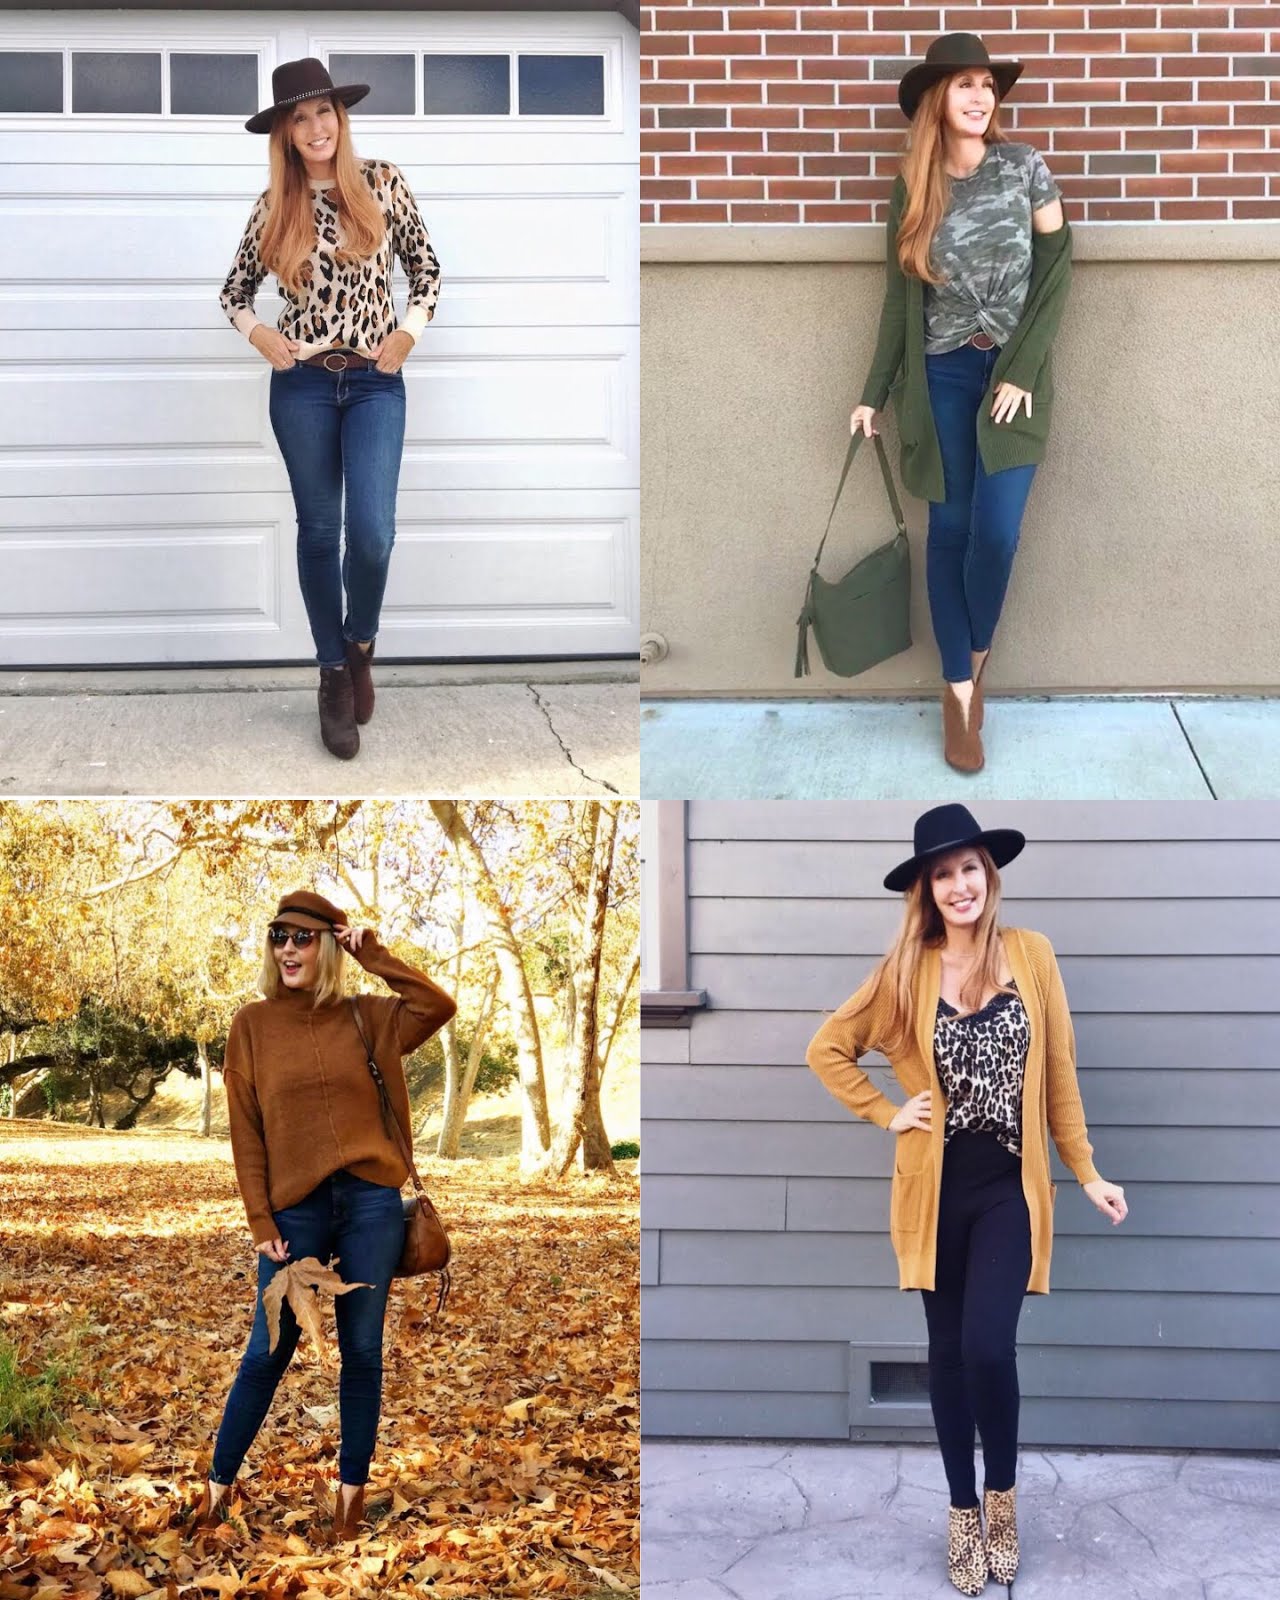 Hats To "Fall" In Love With